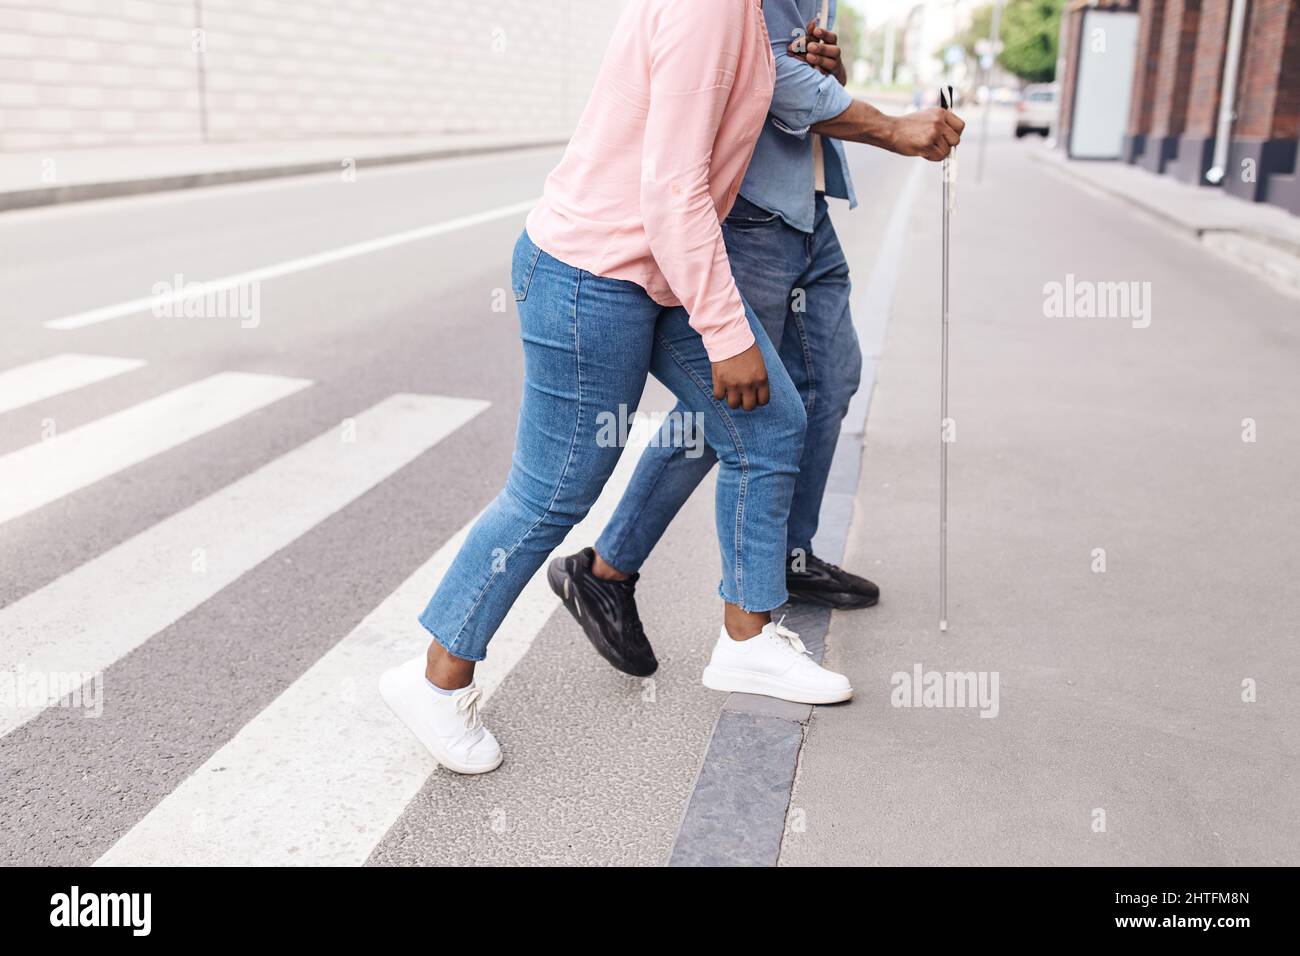 Unrecognizable young black woman assisting millennial guy with vision disability to cross city street, copy space Stock Photo